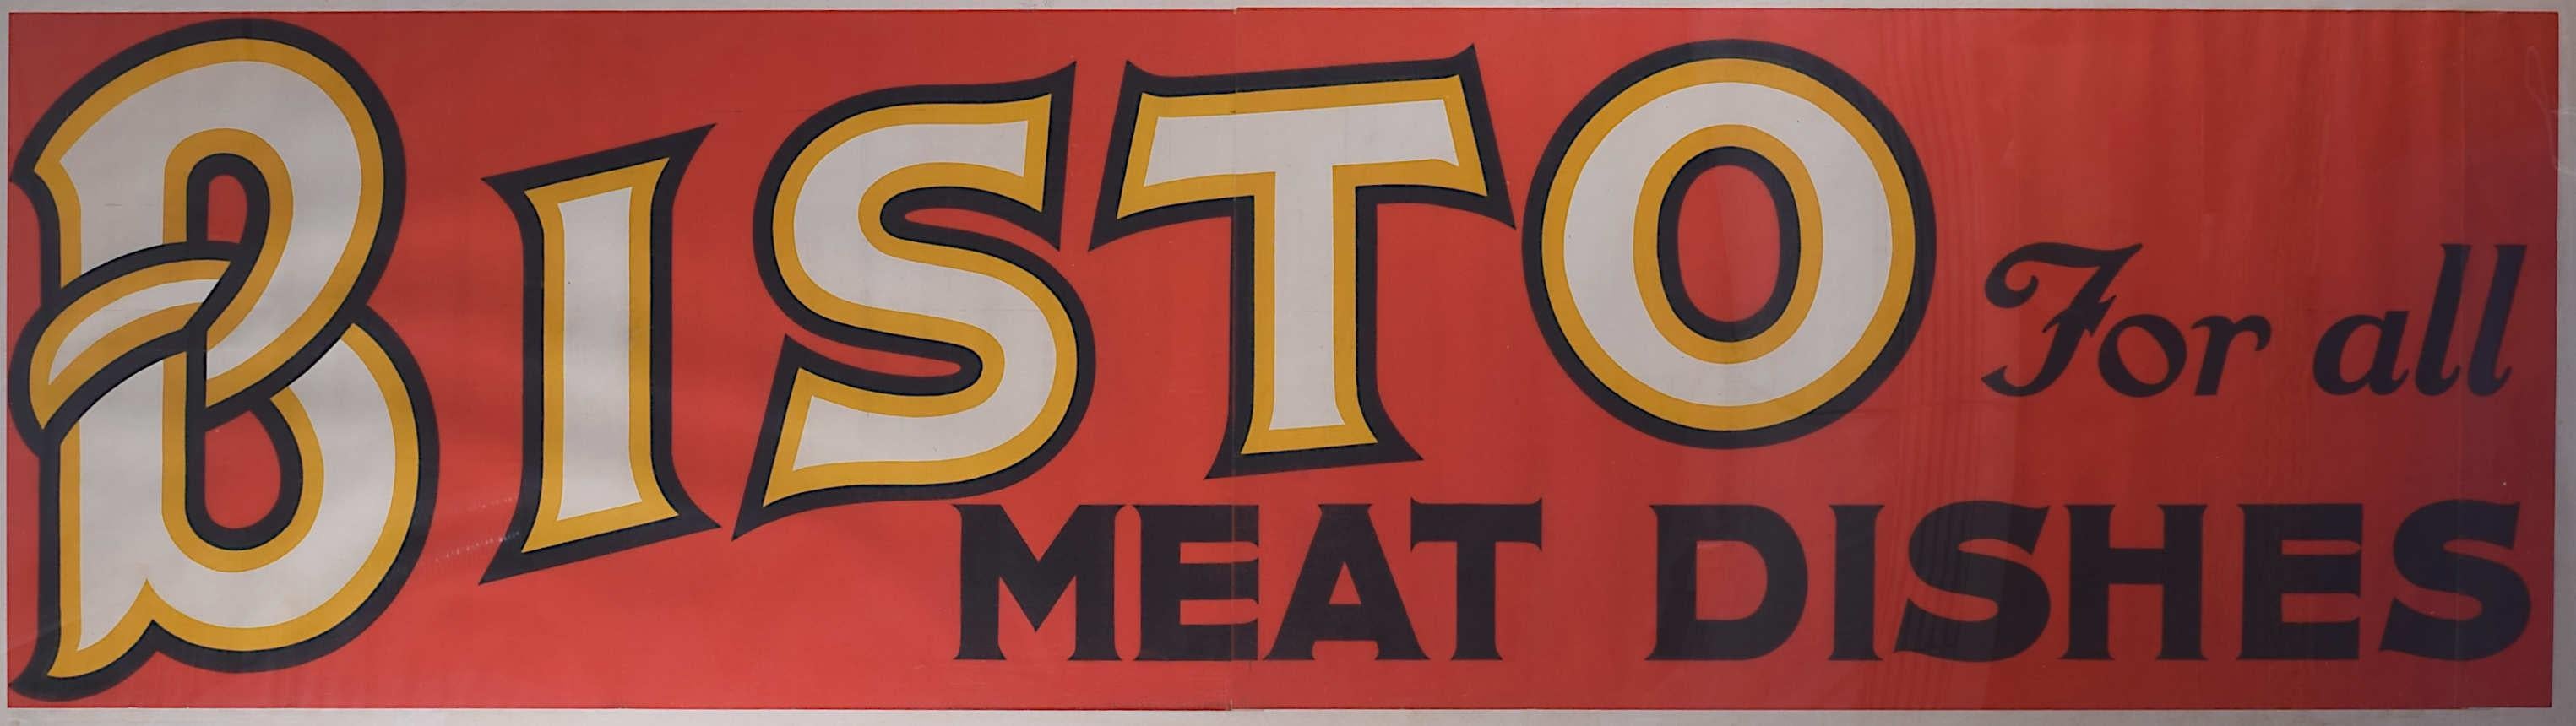 'Bisto for all Meat Dishes' original vintage poster c. 1950 - Print by Unknown